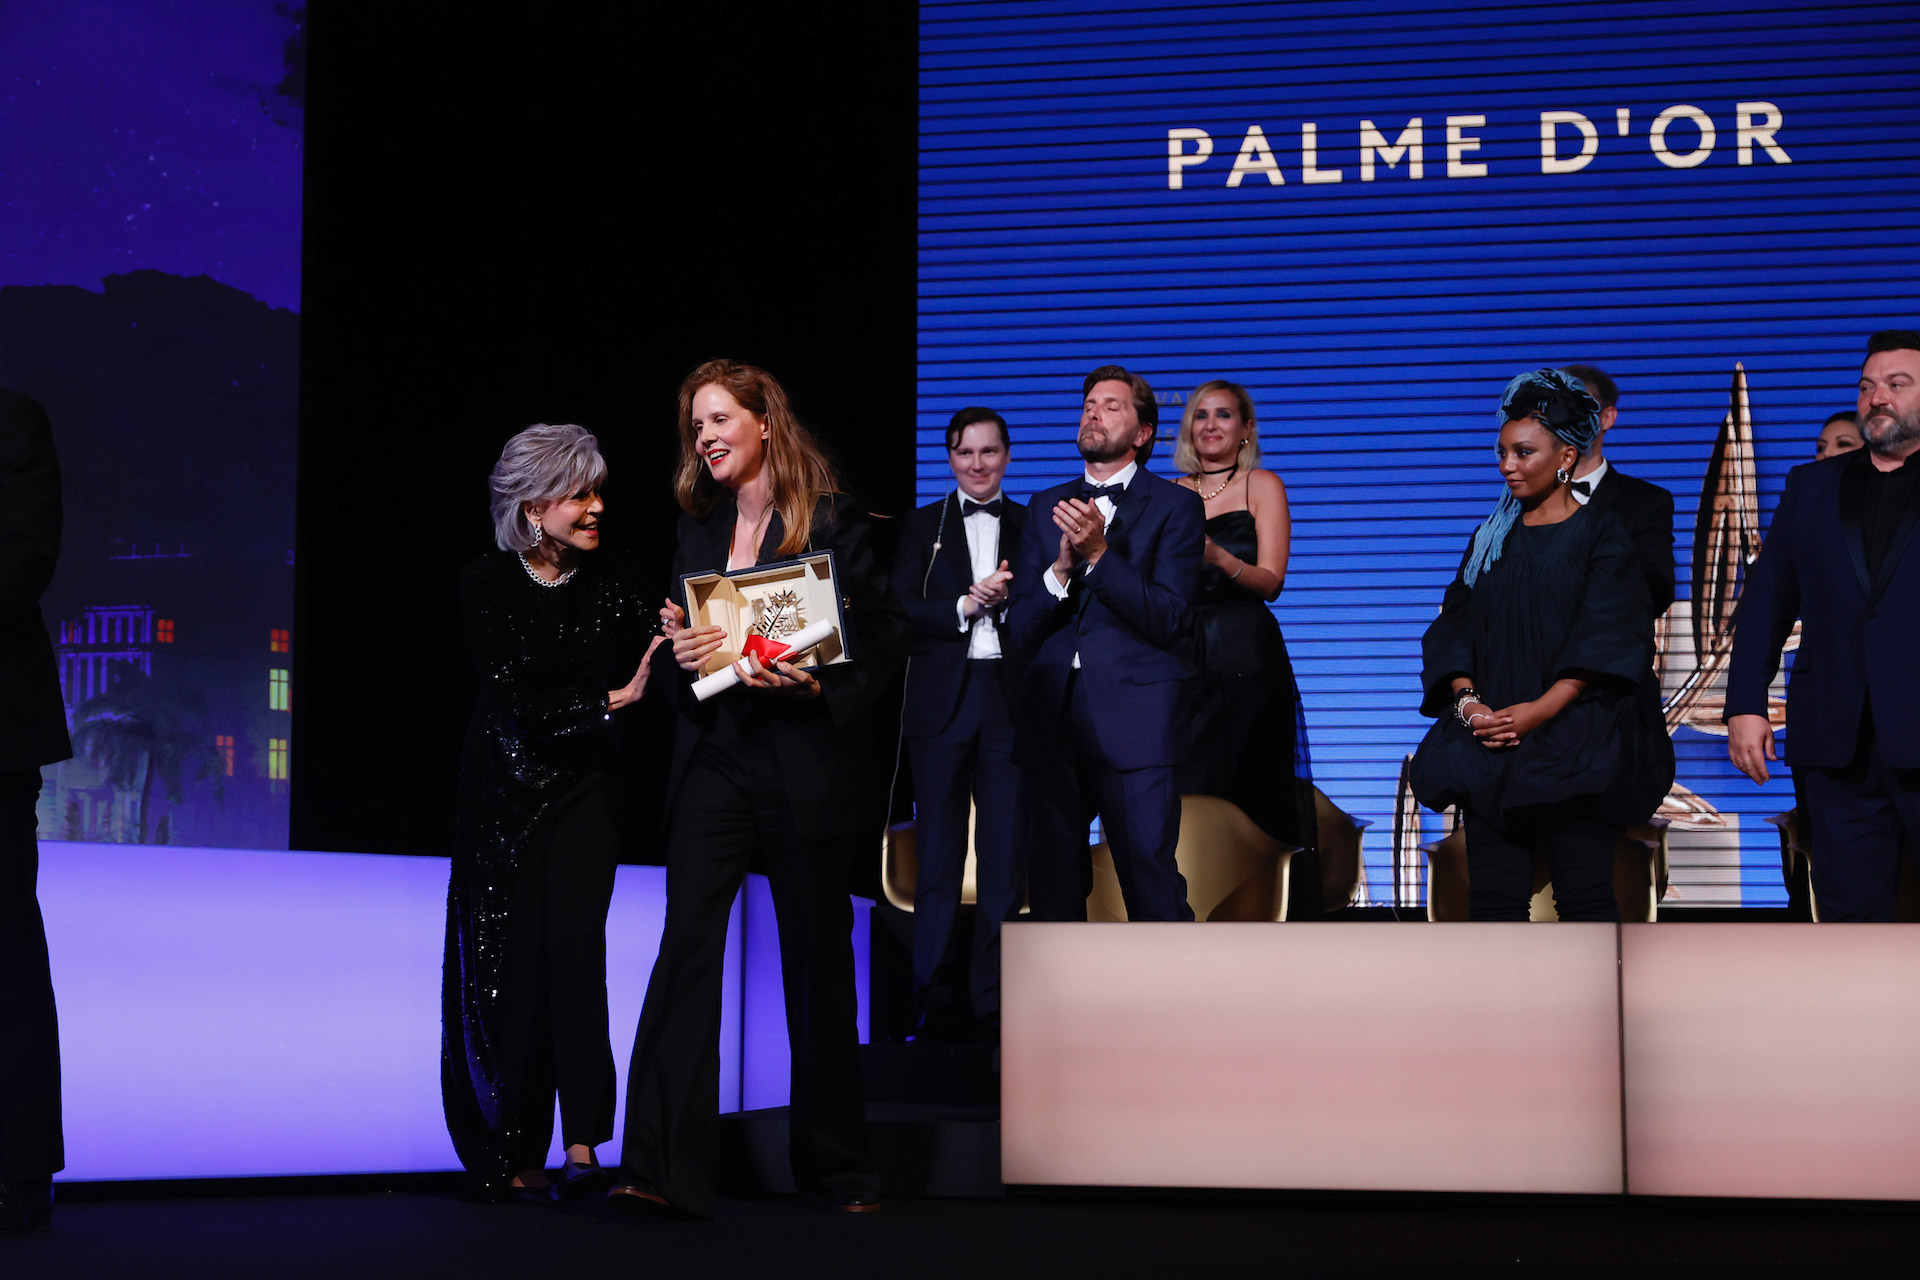 Palme d'or to Justine Triet